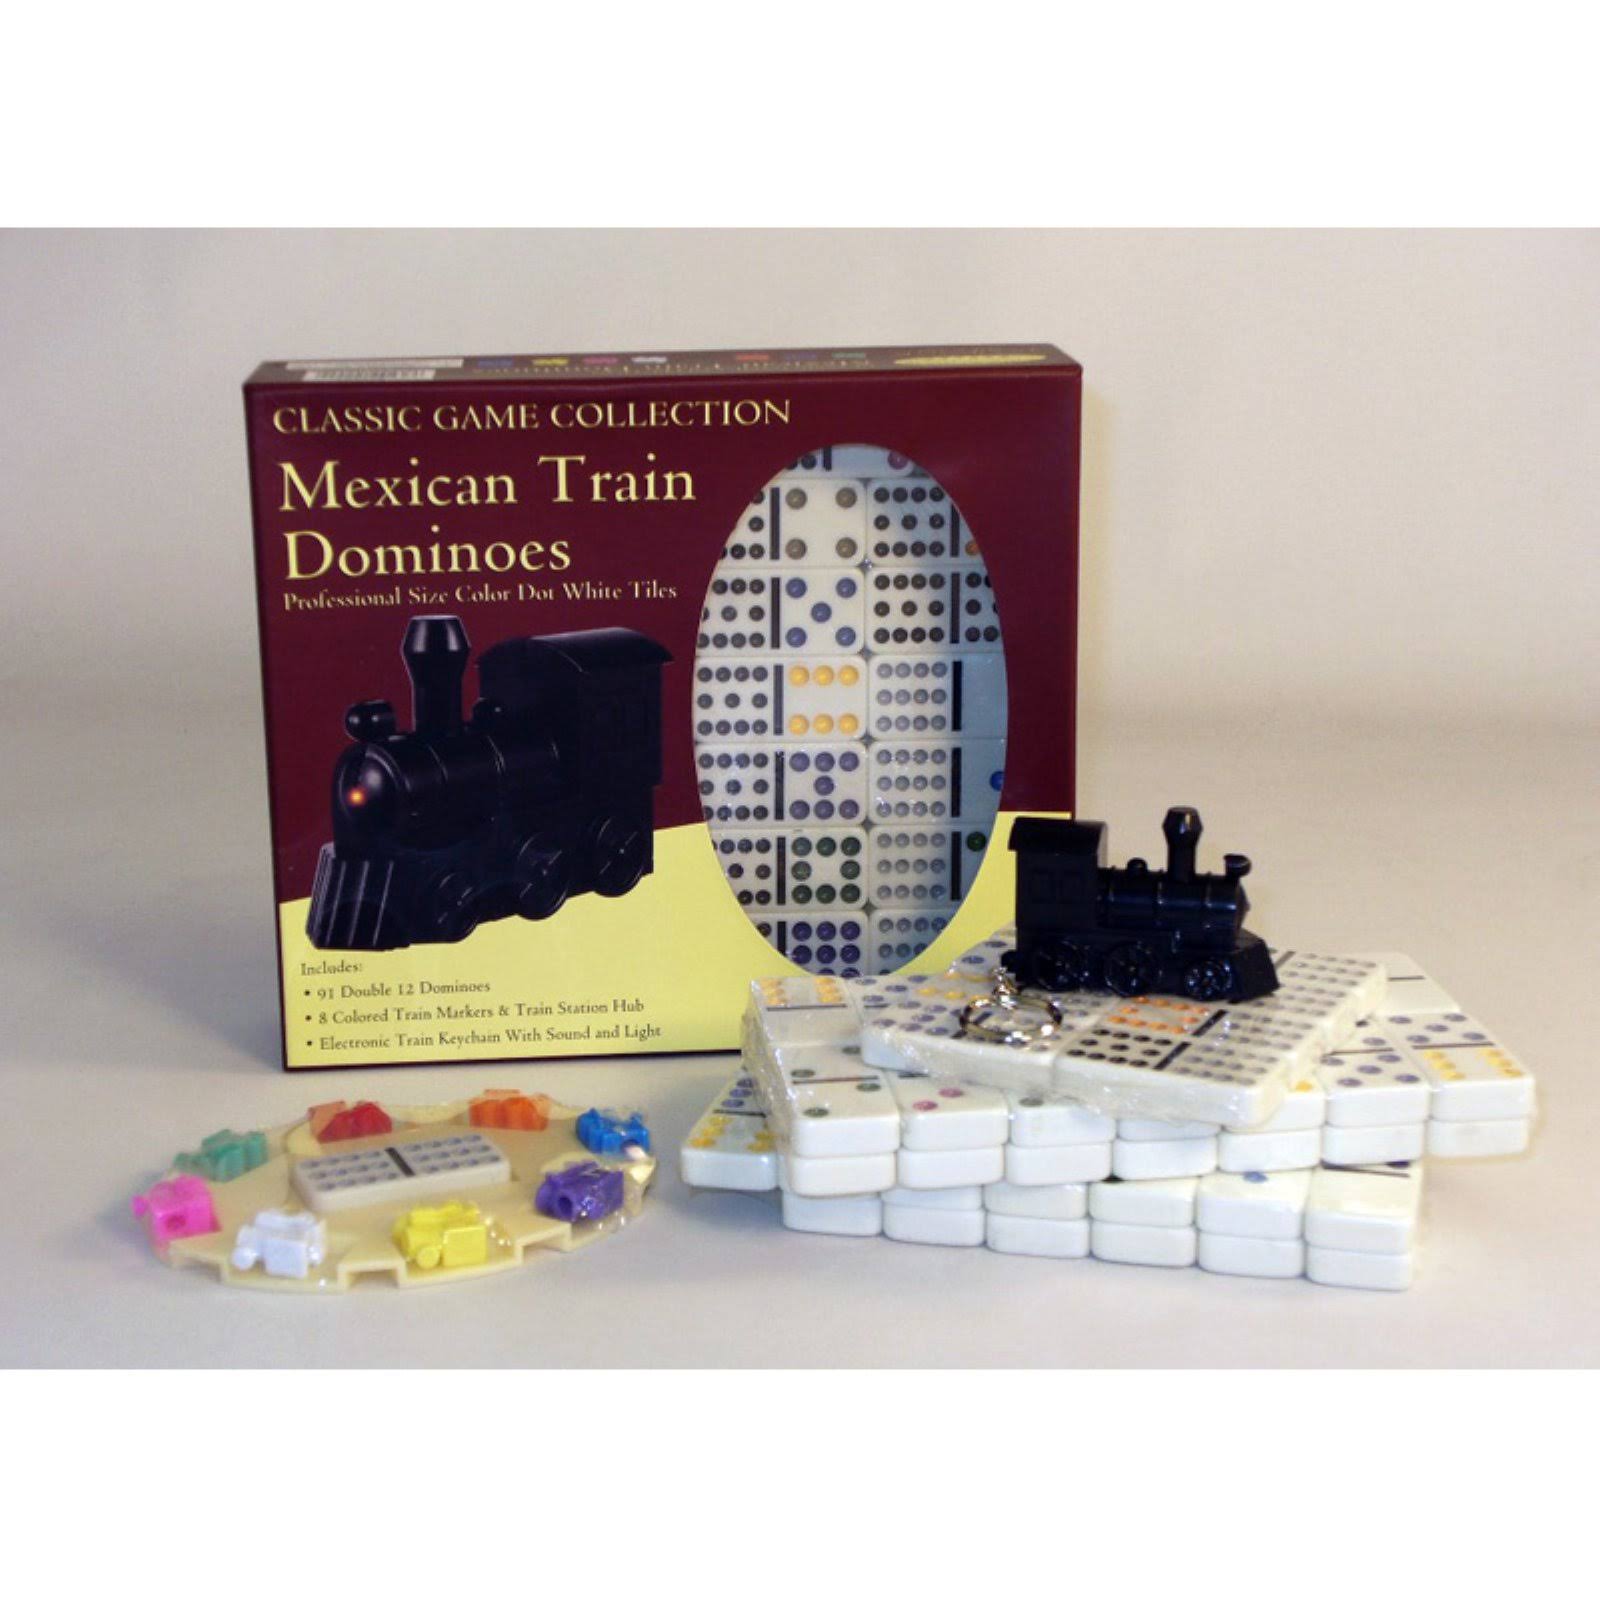 Classic Game Collection Mexican Train Dominoes